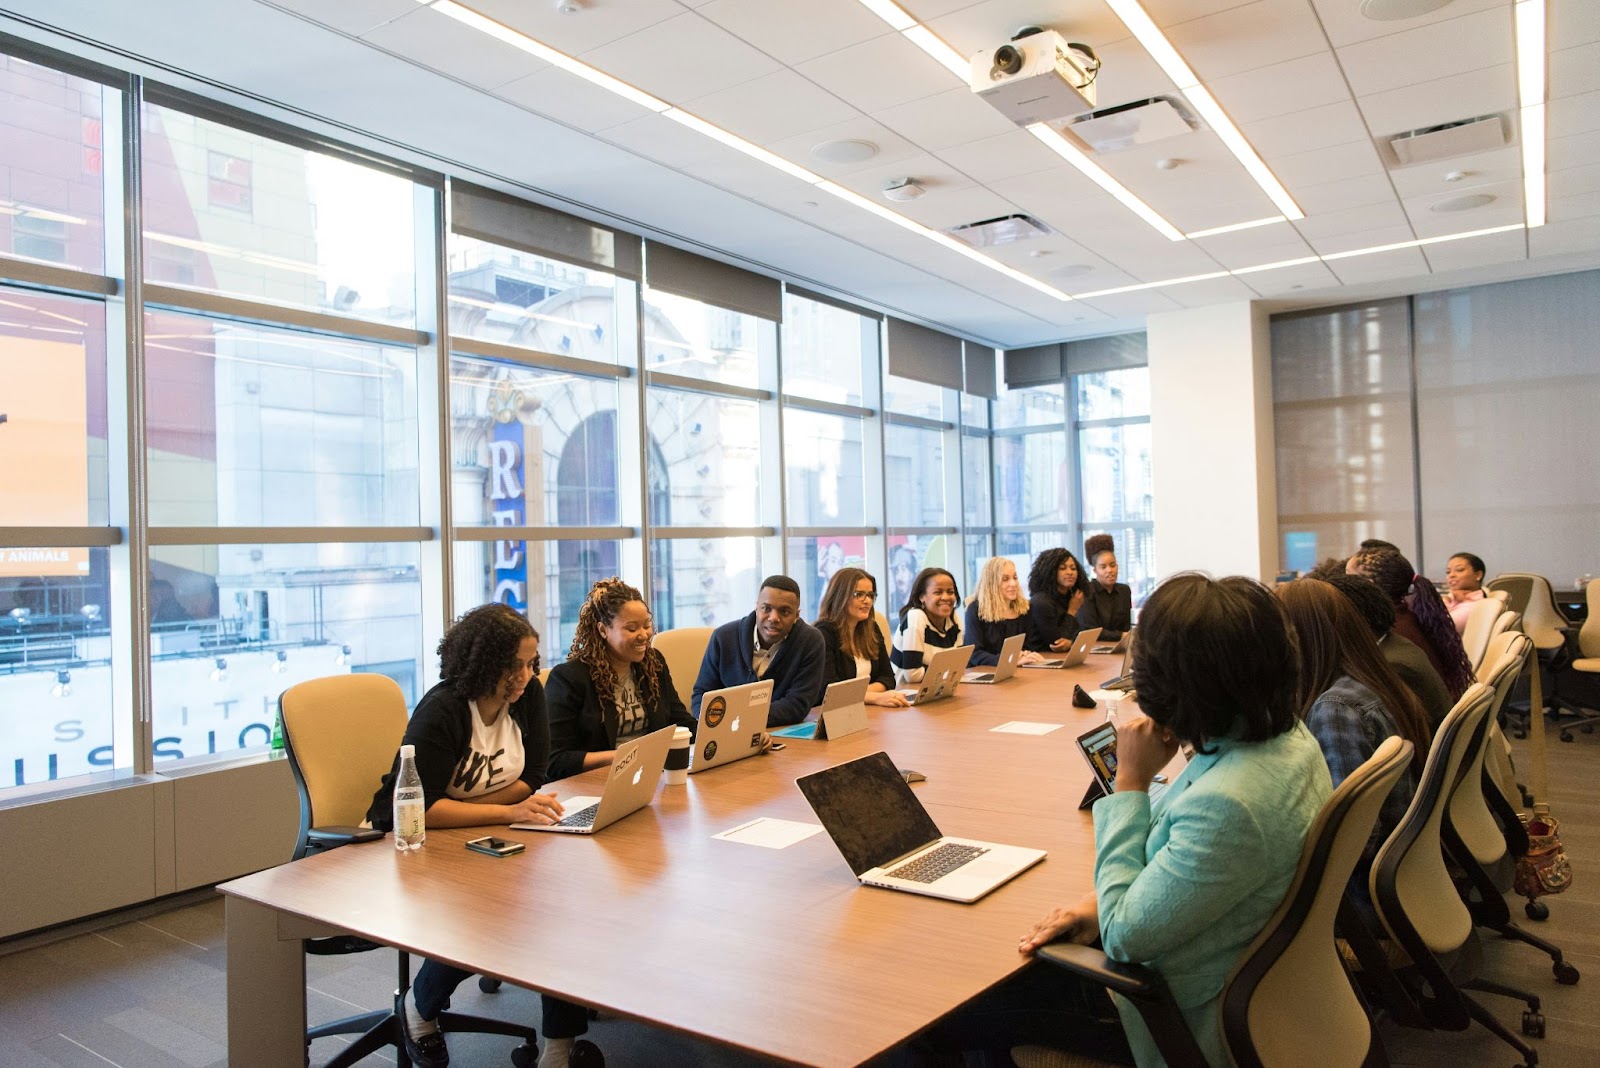 A group of professionals gathered around a conference table during a training session.